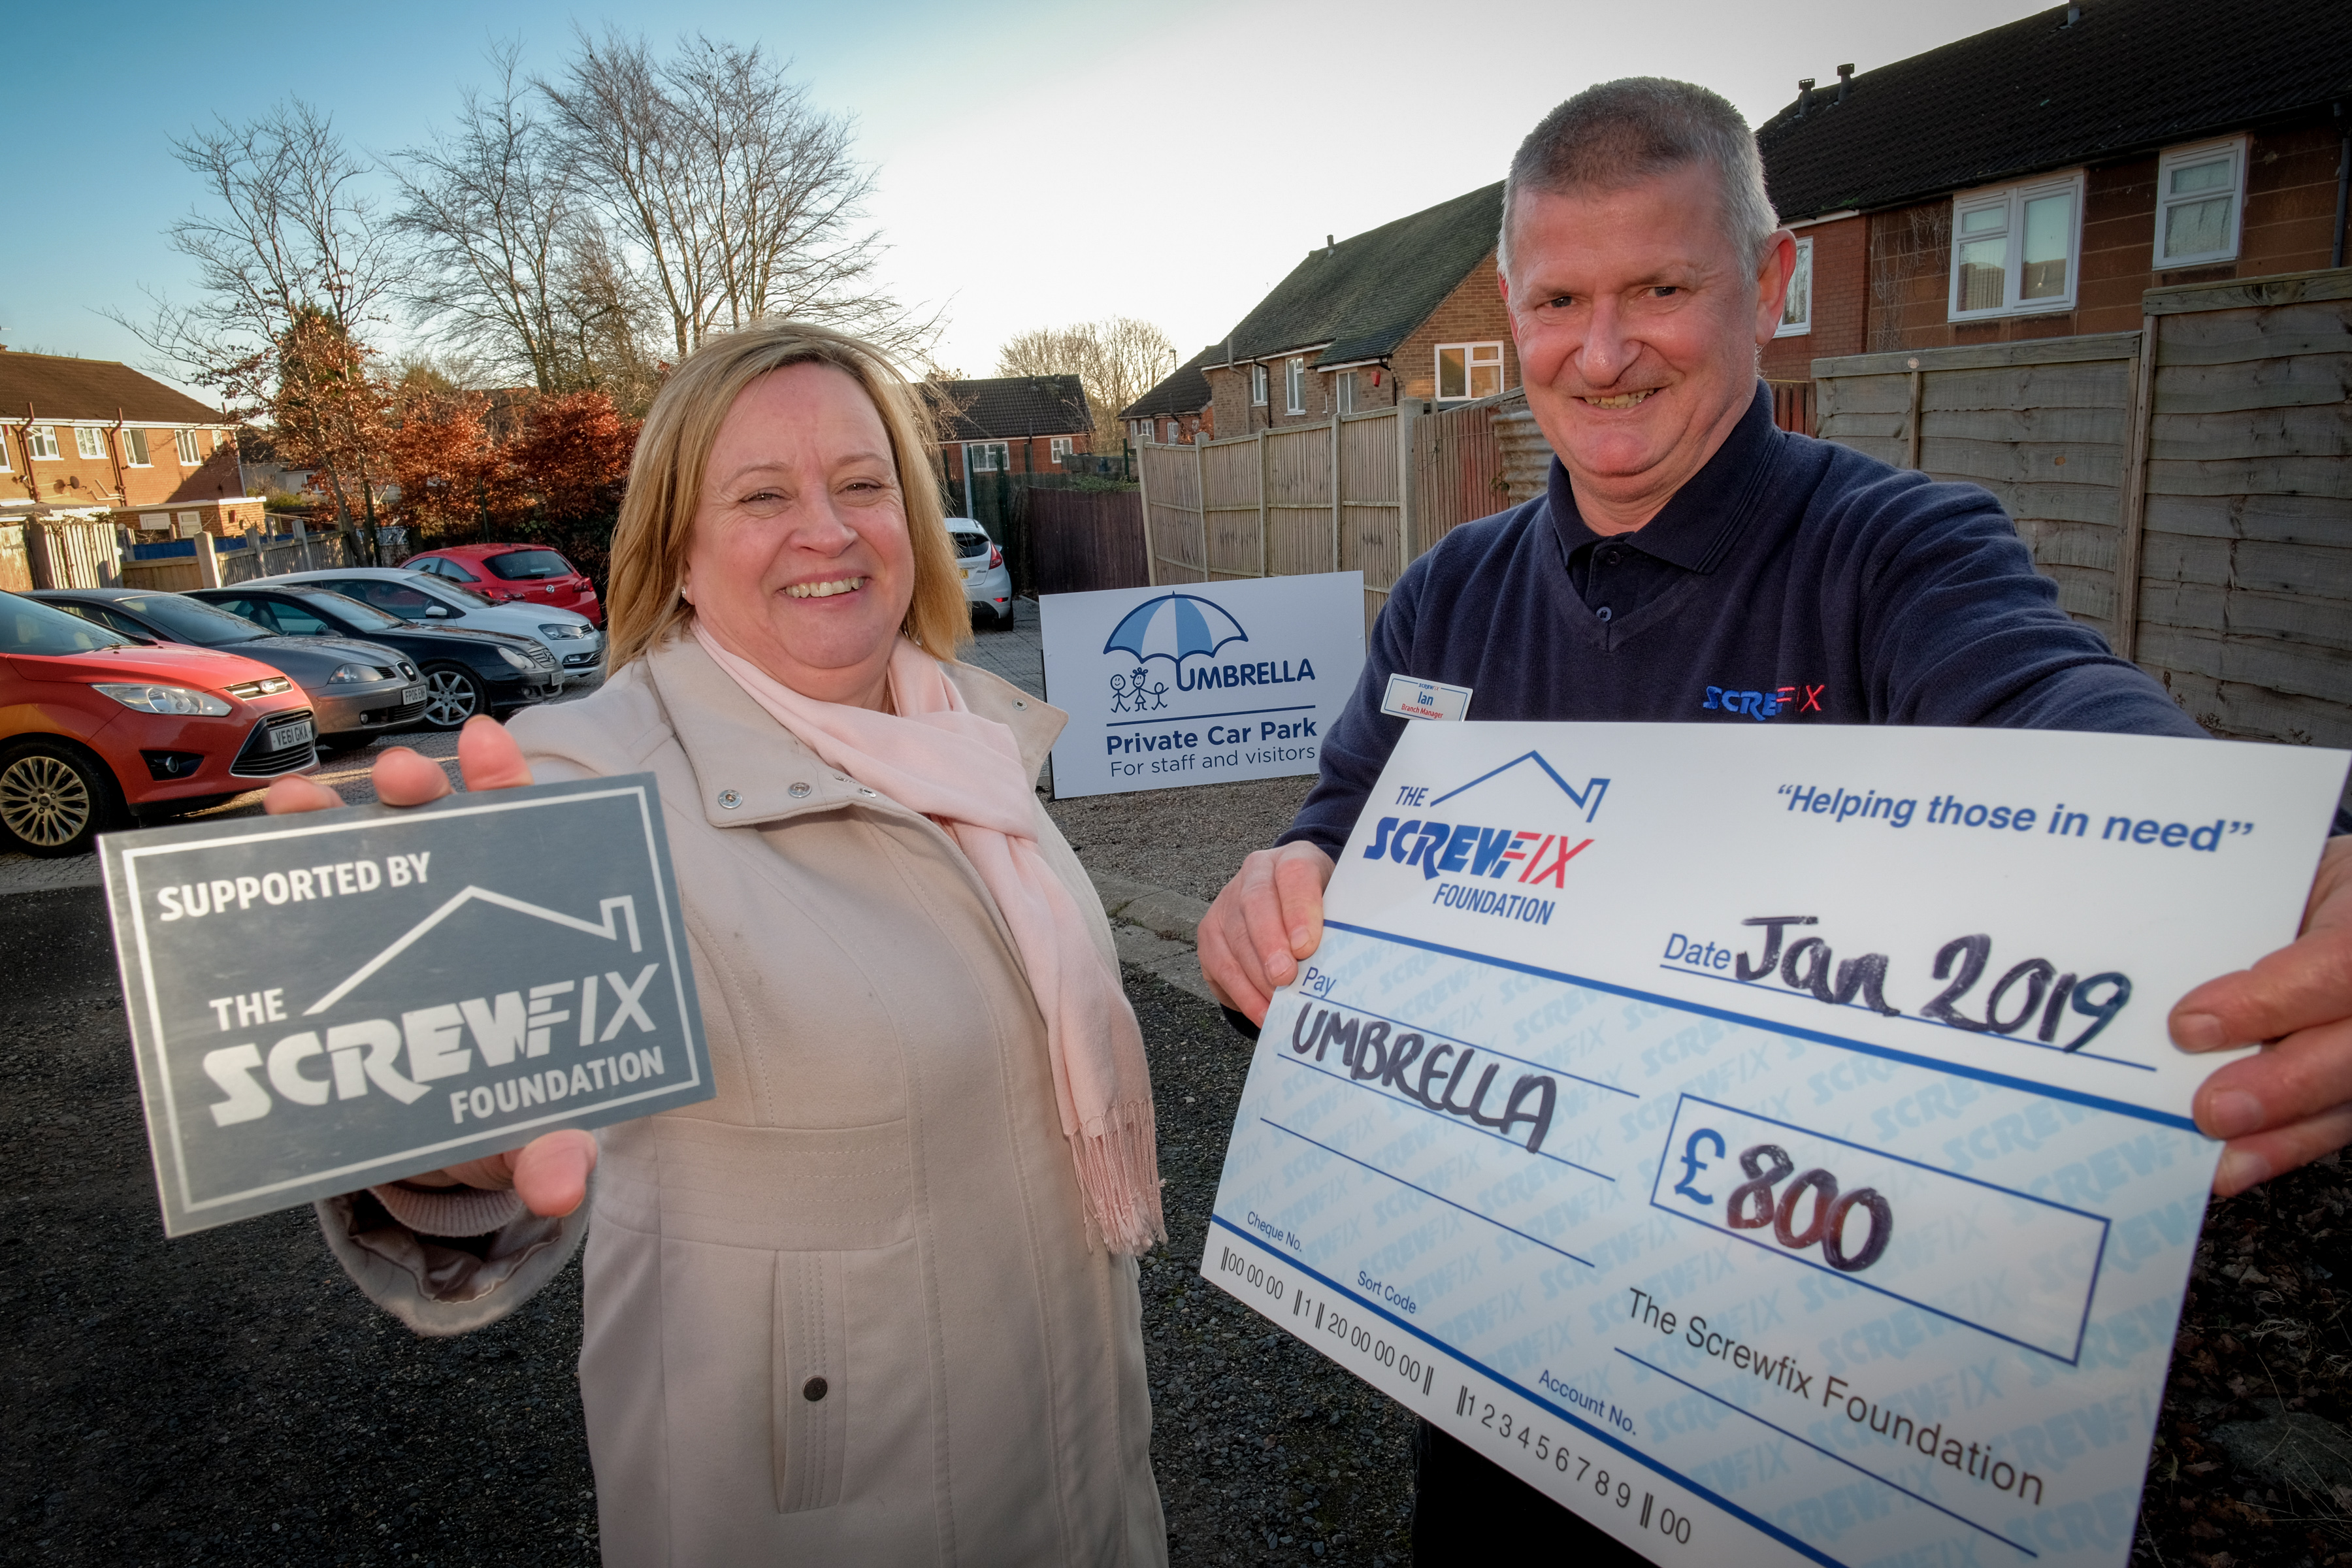 Umbrella gets a helping hand from the Screwfix Foundation